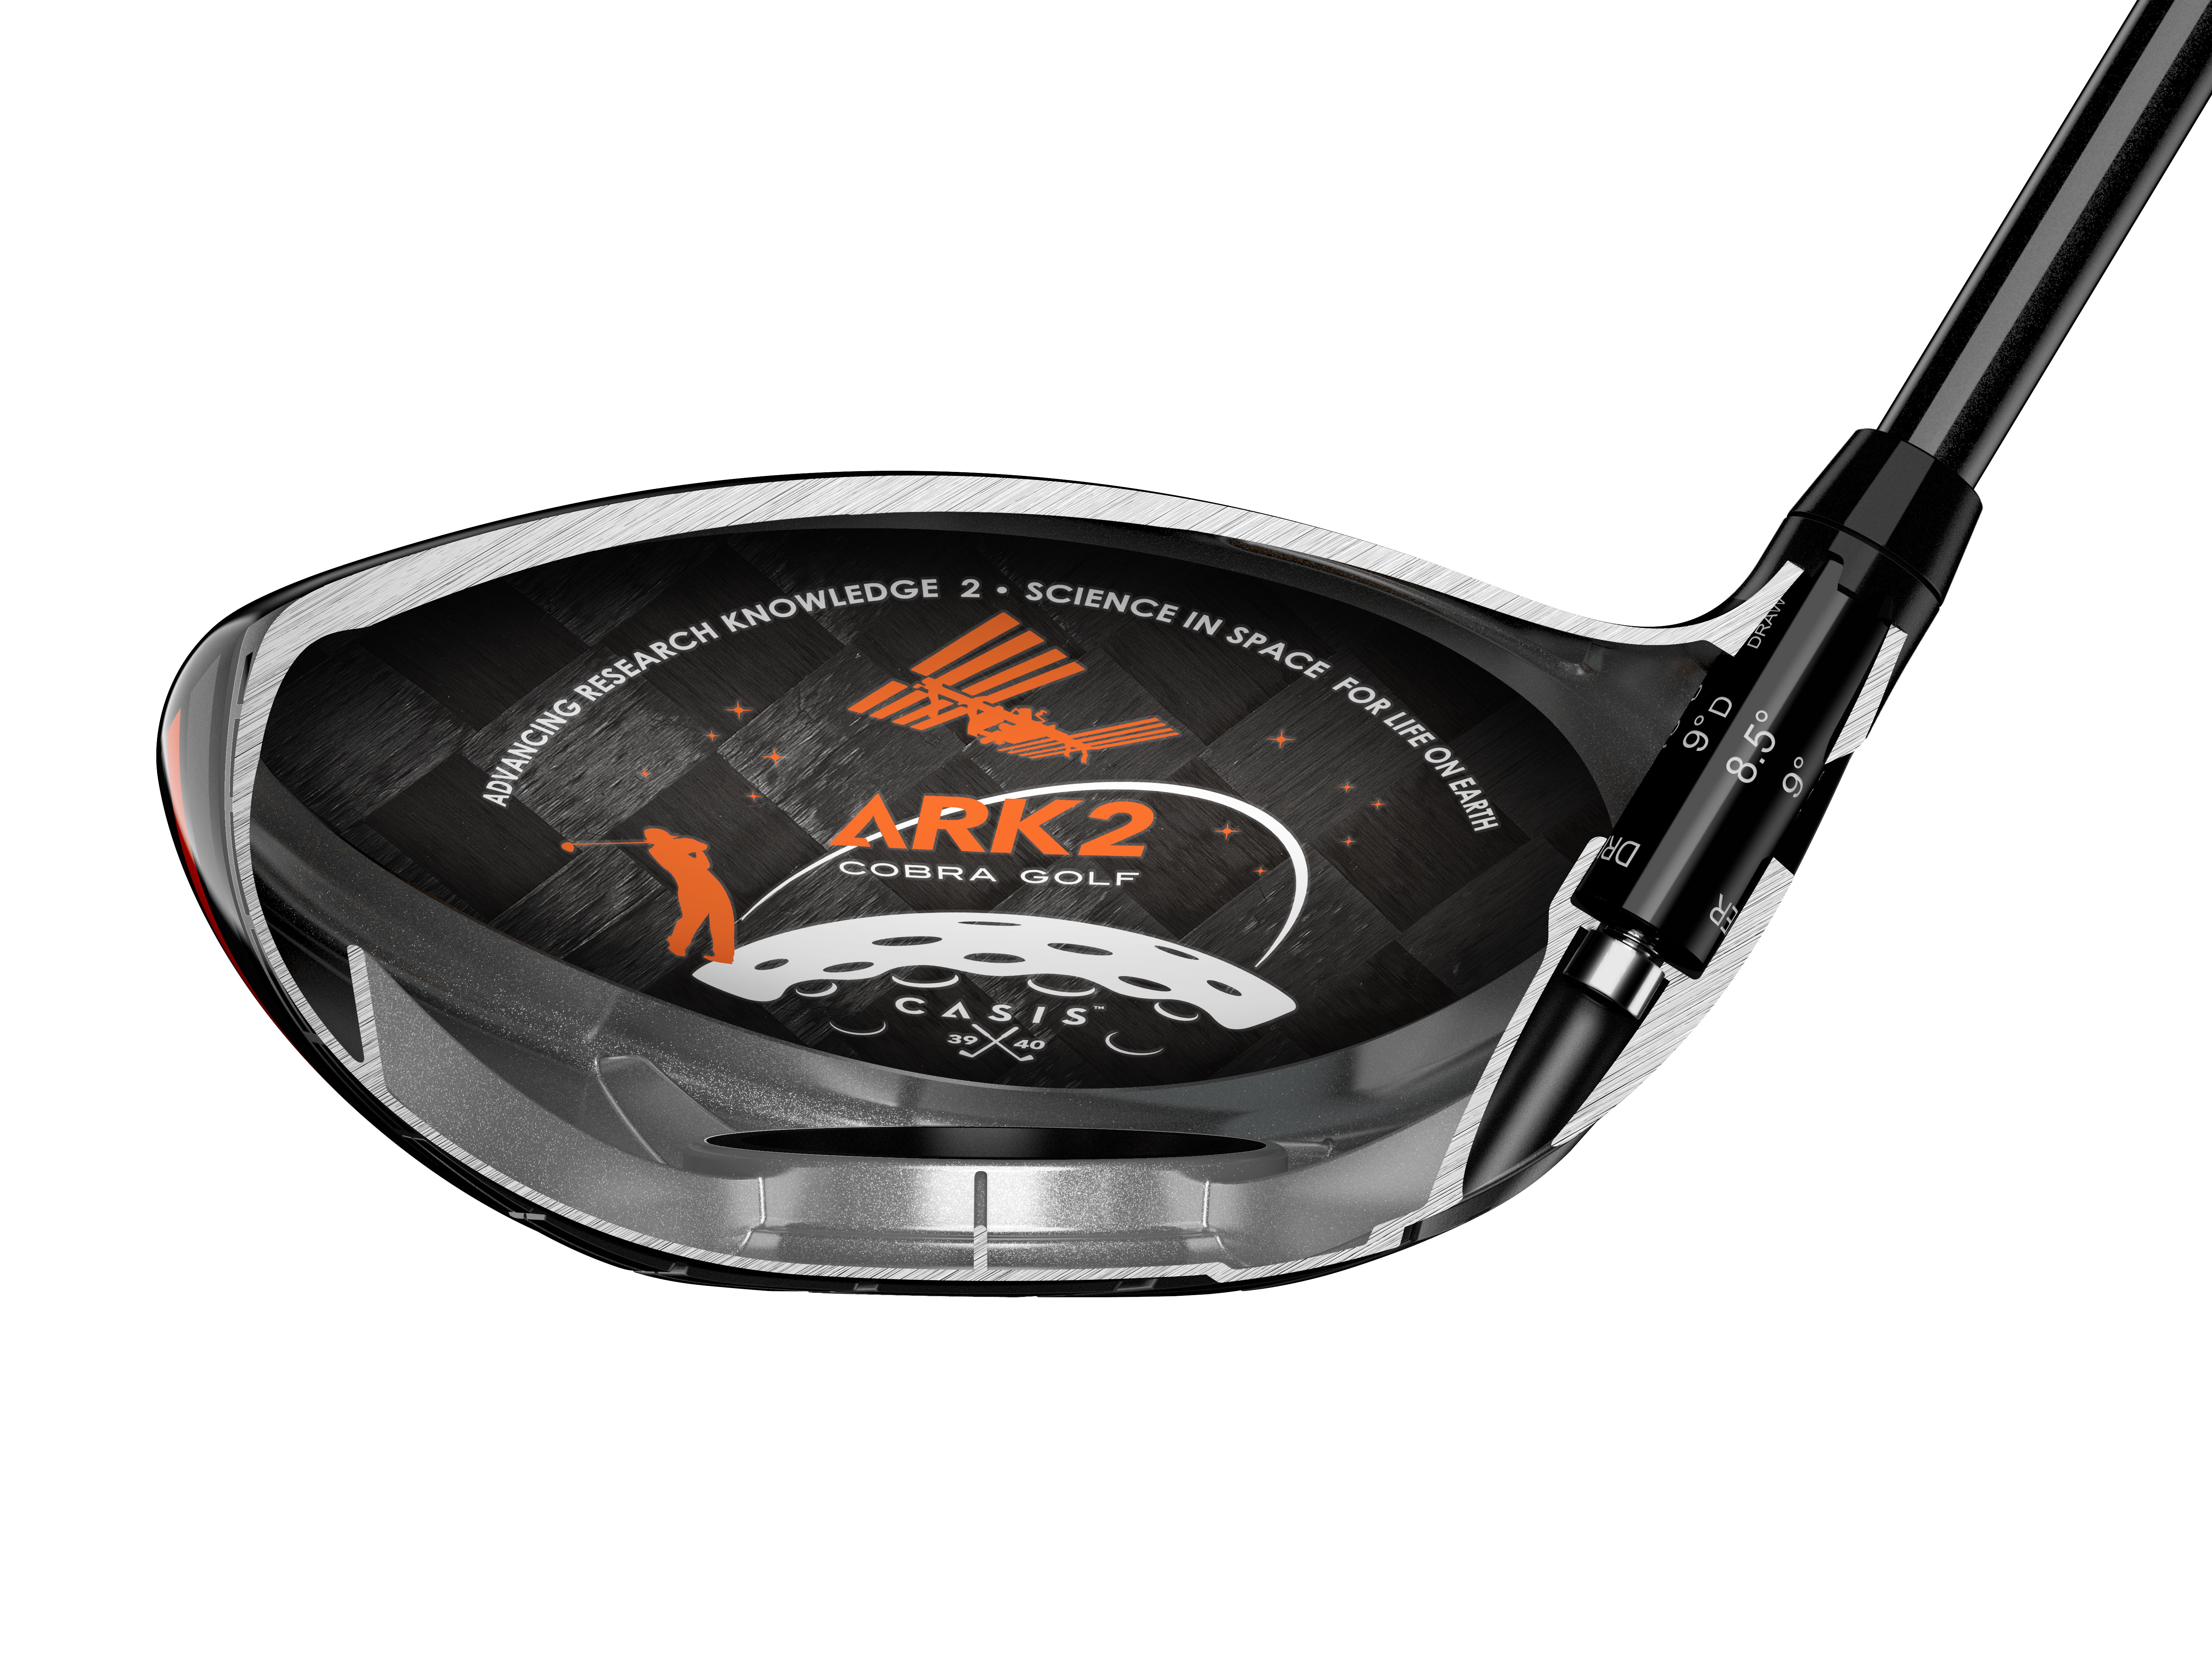 Using TeXtreme in the crown reportedly reduced the golf club’s total weight by 20%.